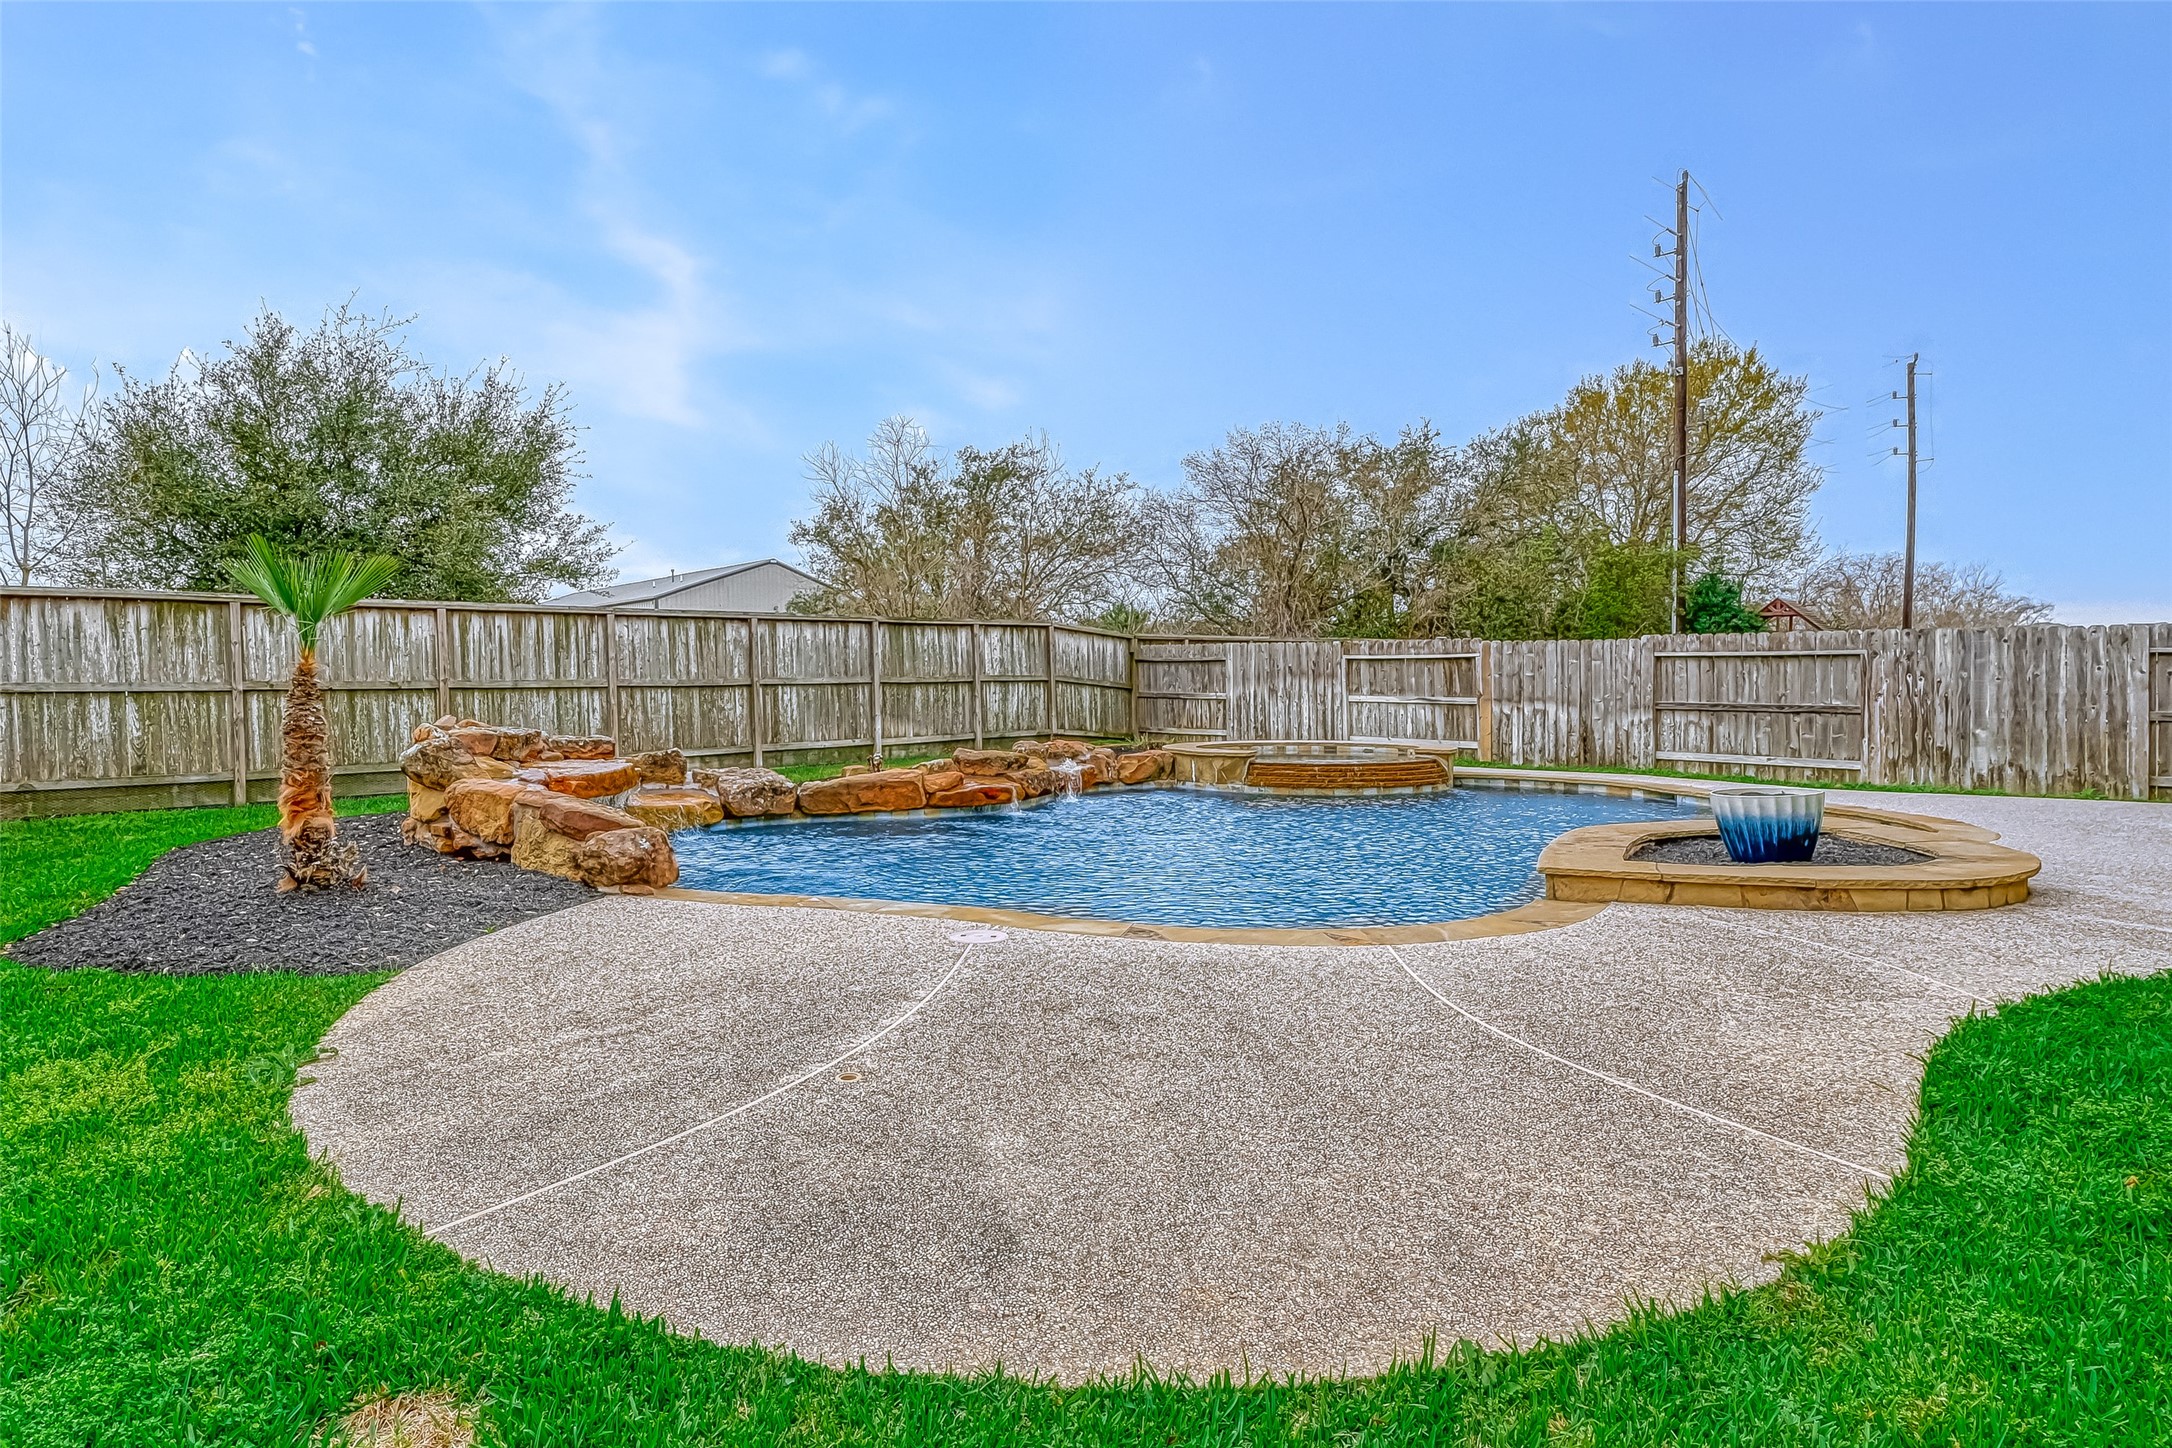 Gorgeous pool and spa with rock water features.  Great space to cool off and relax!!
